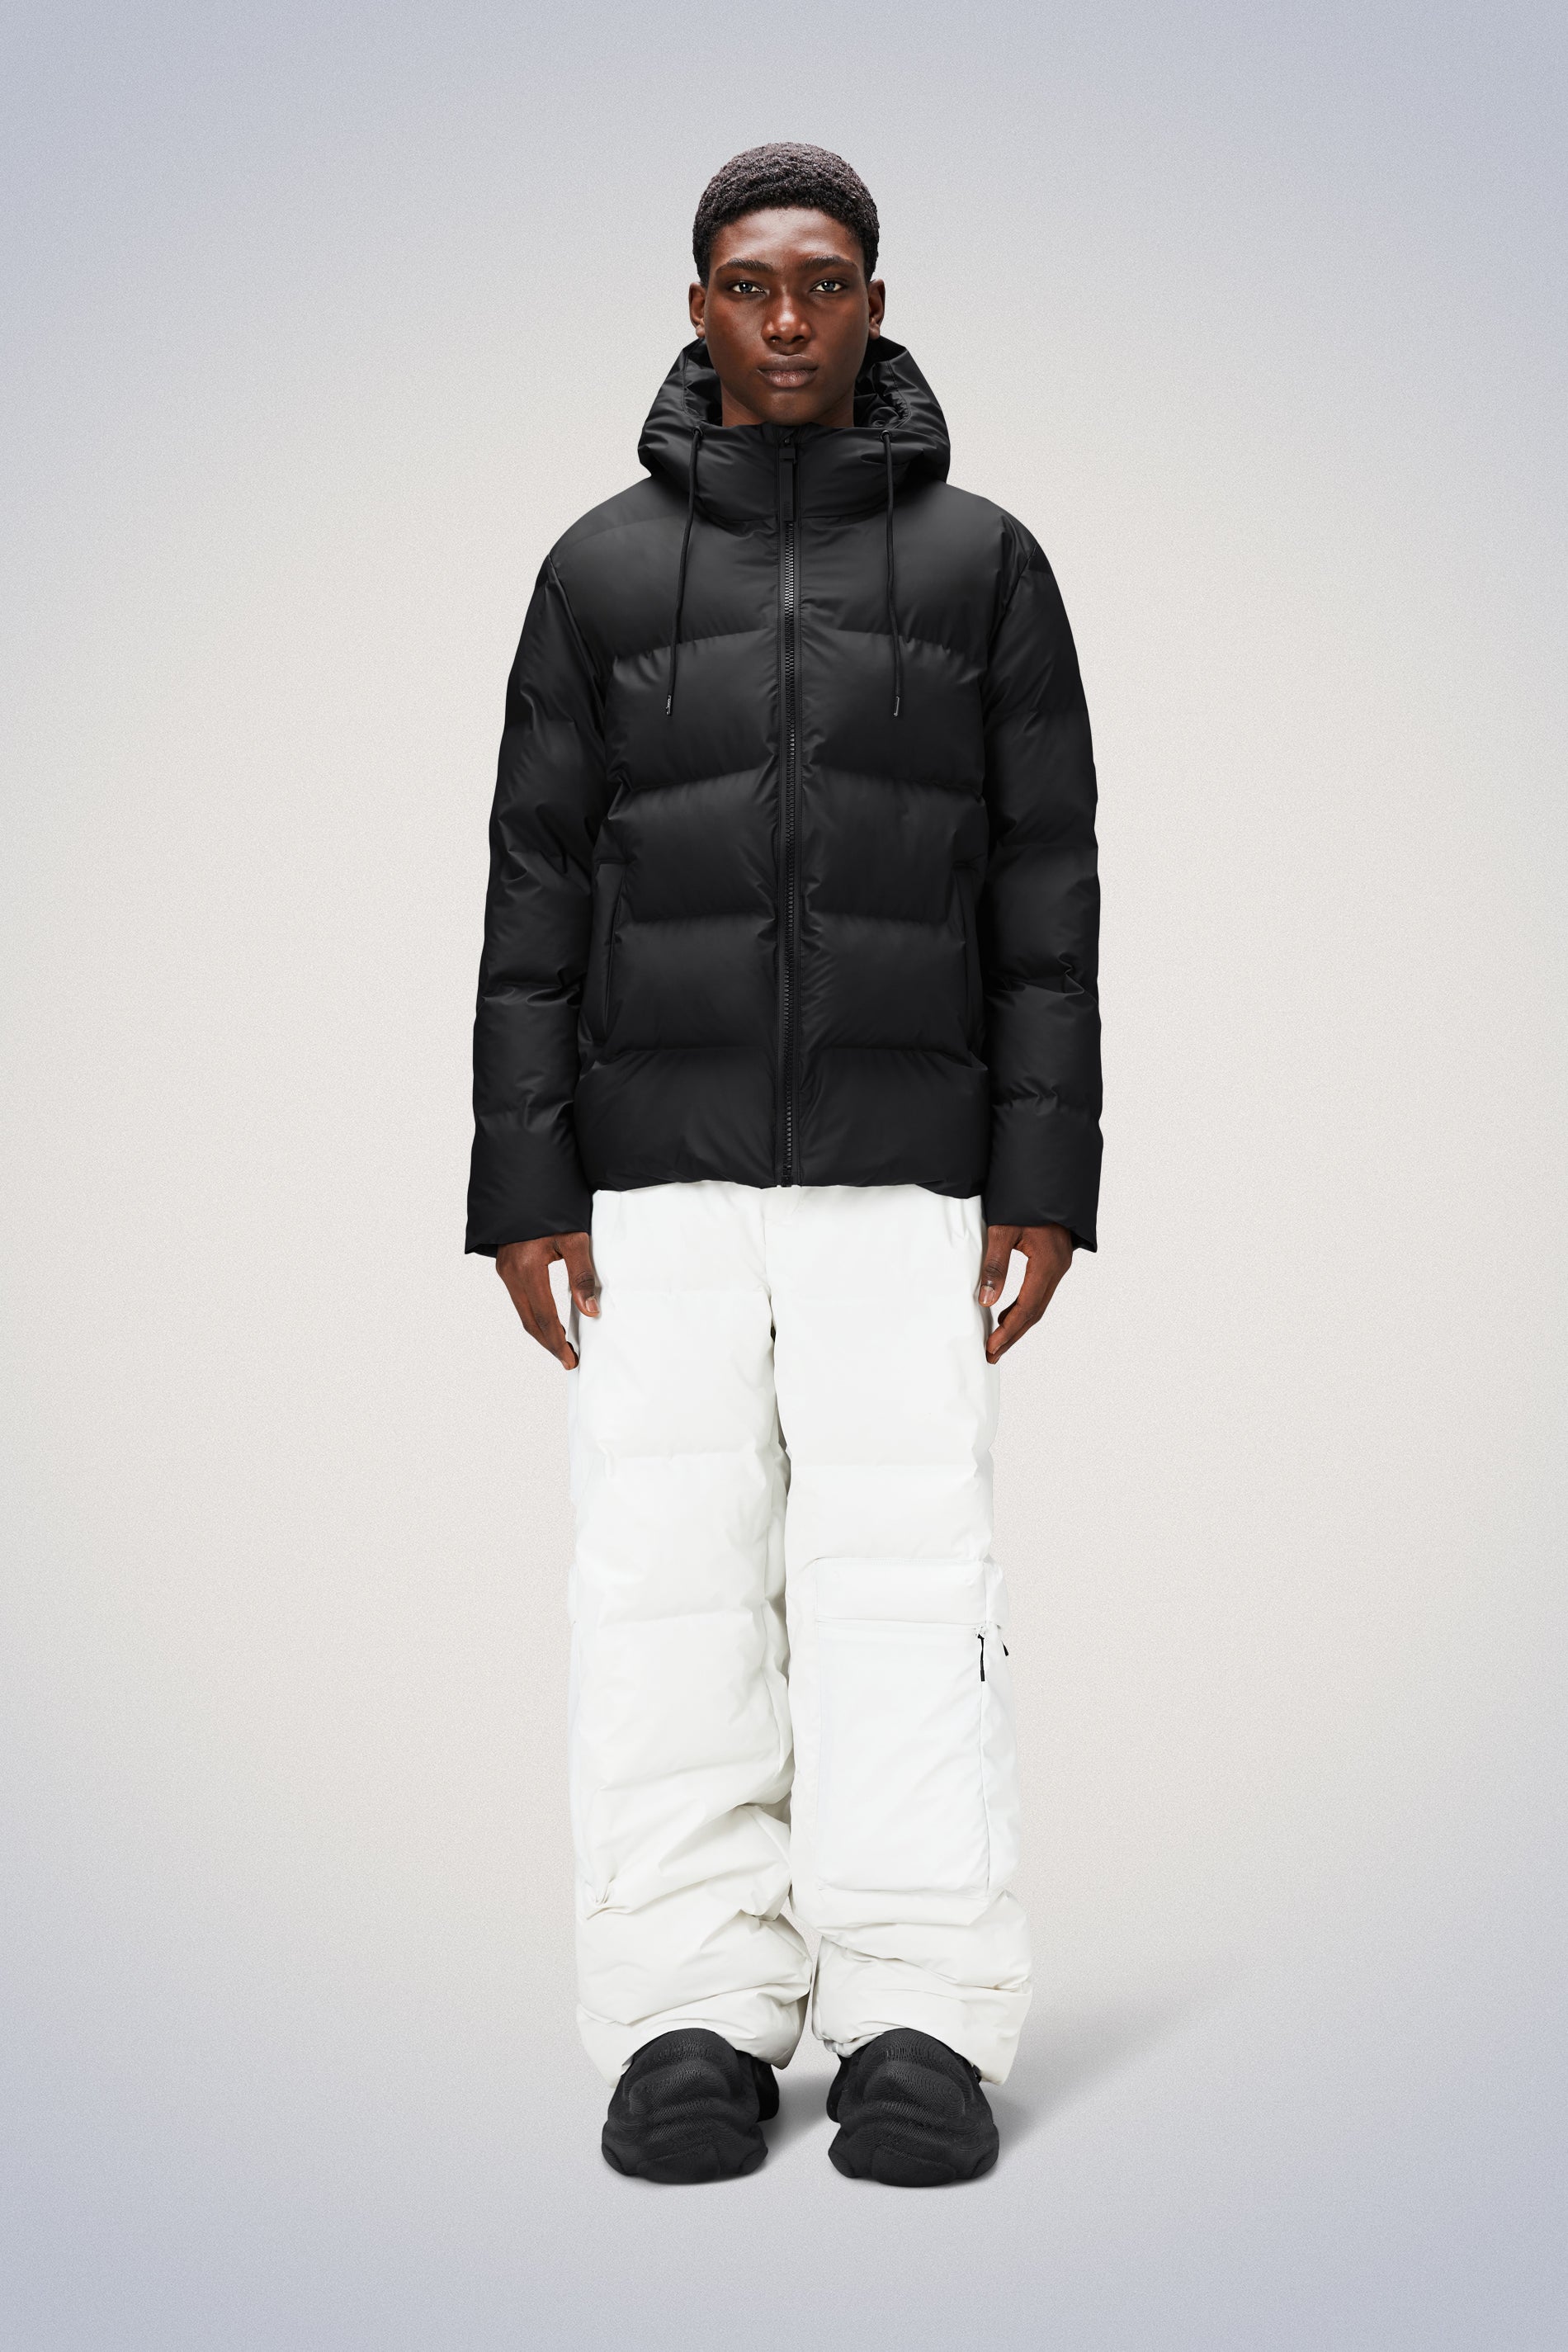 Rains® Long Puffer Jacket in Black for $700